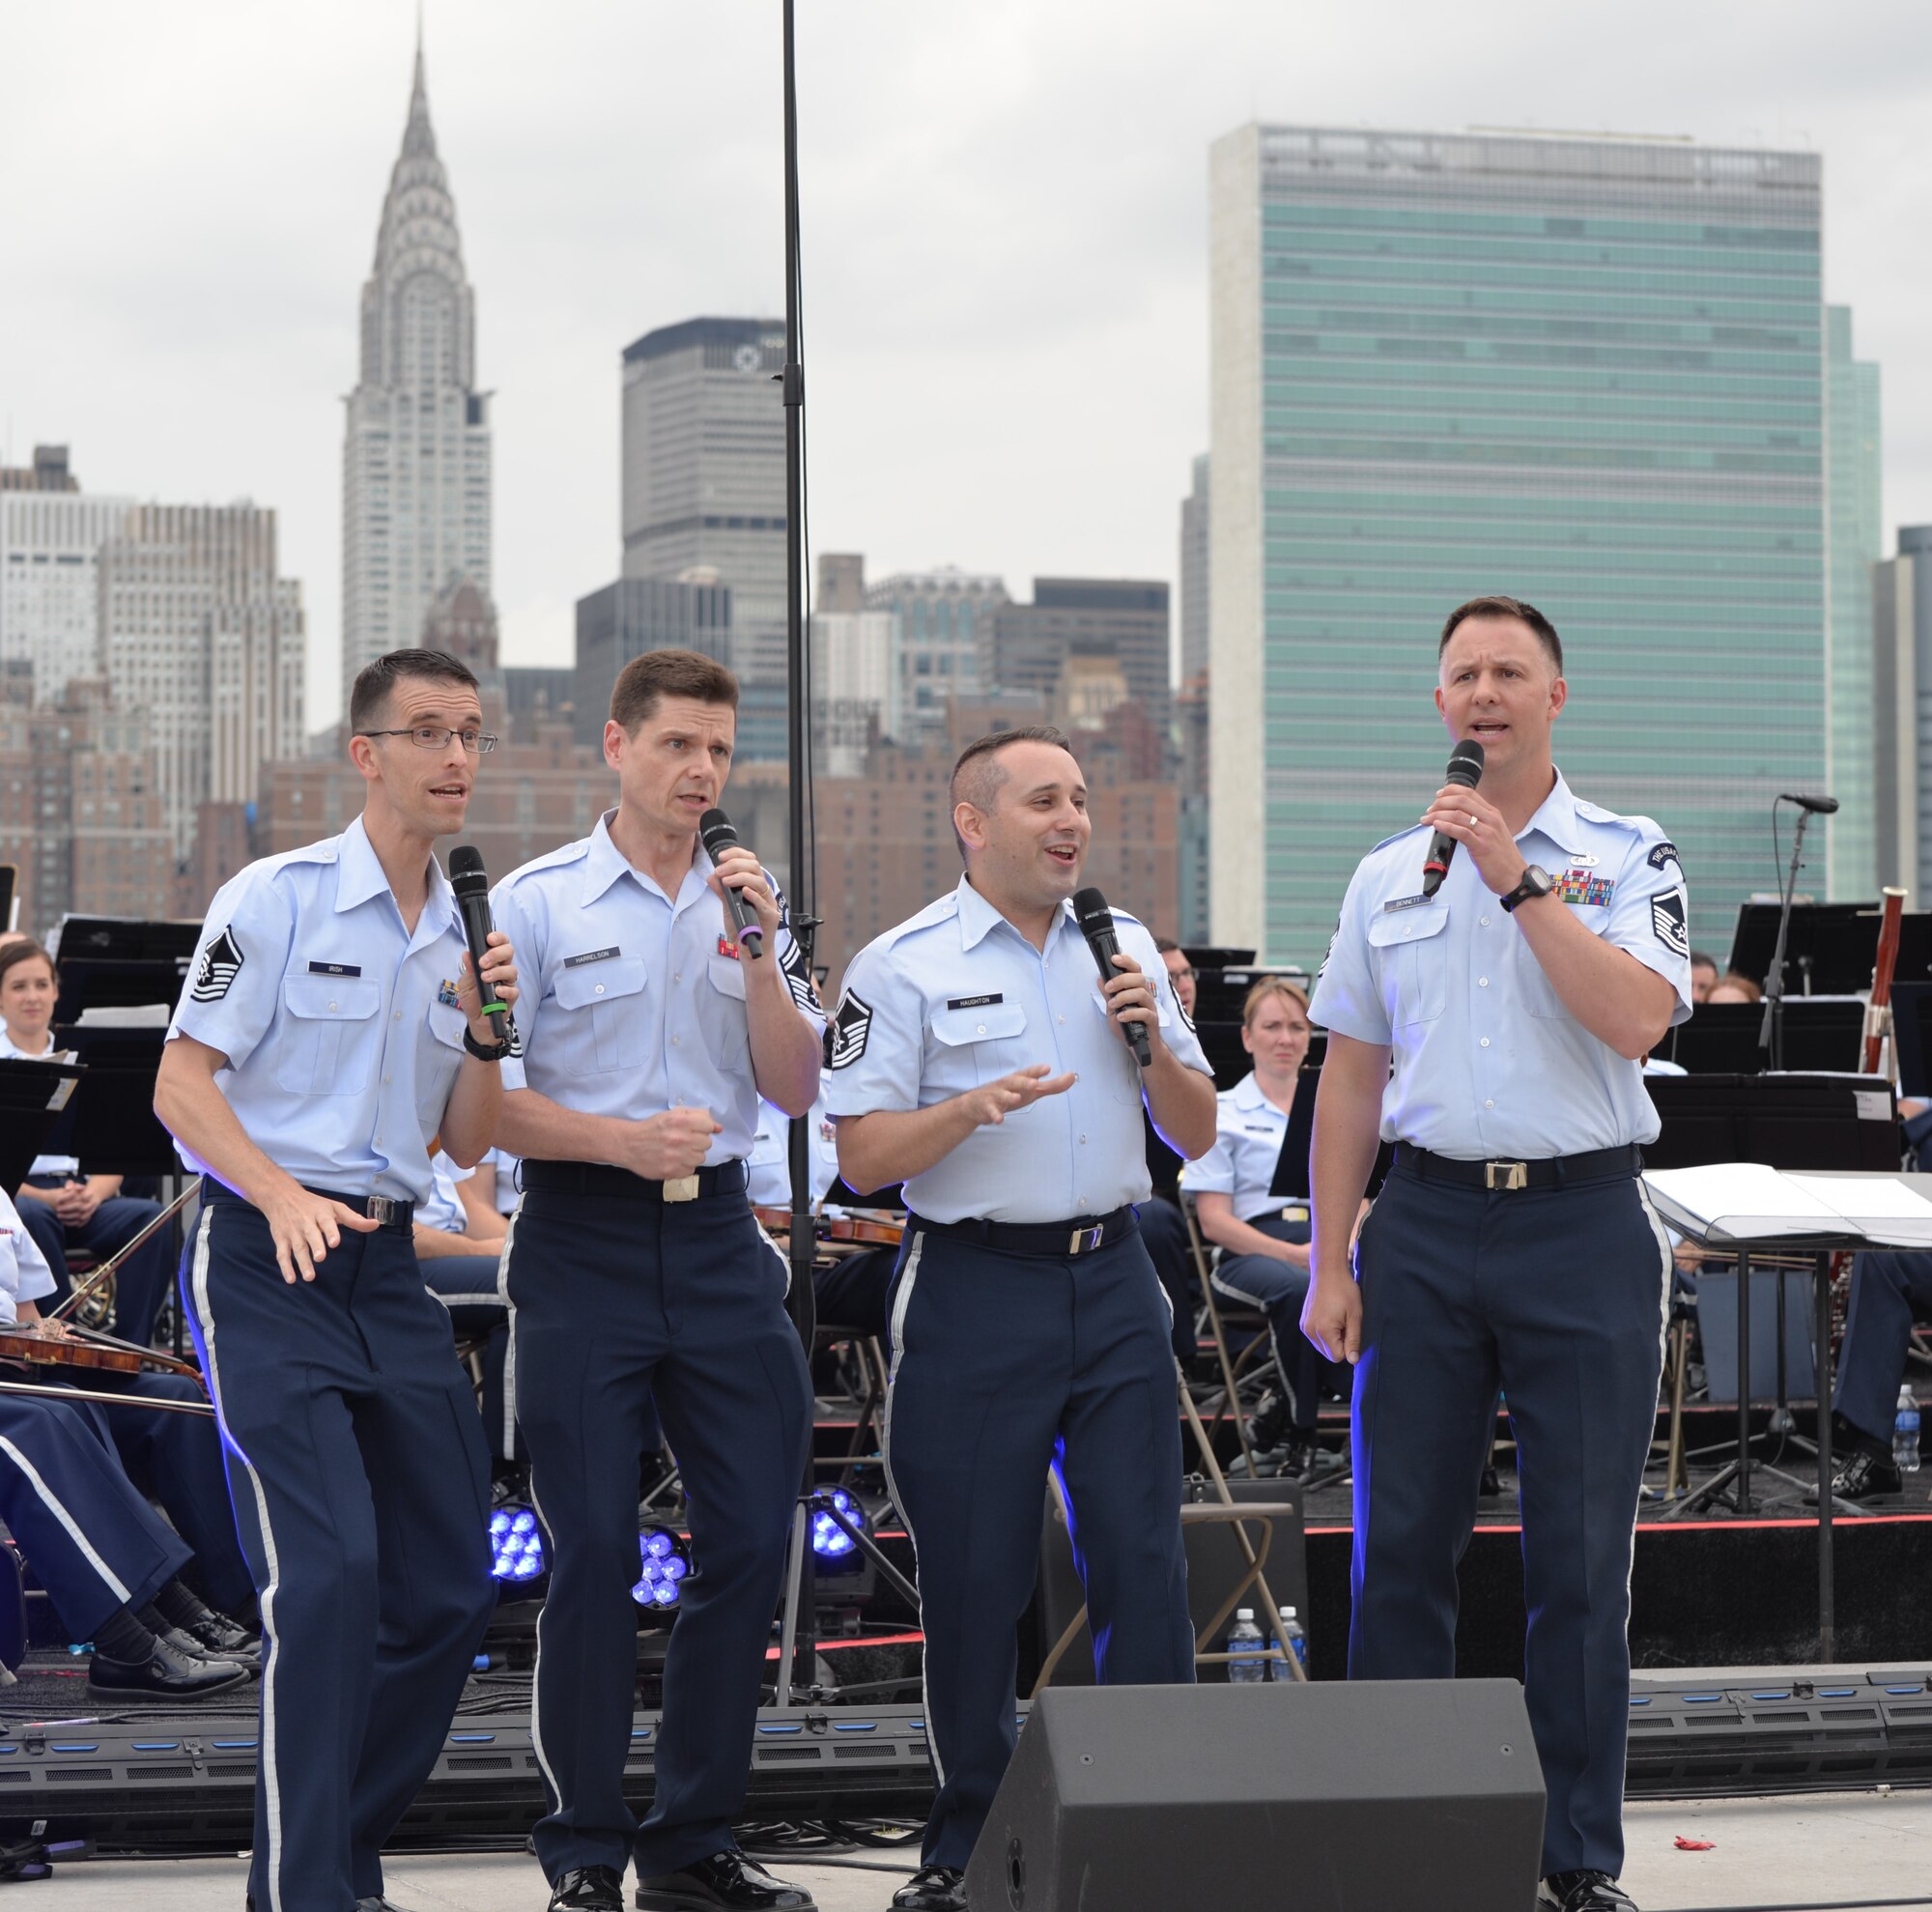 The Singing Sergeants’ Barbershop Quartet performed a number for the crowd at the Macy’s Fourth of July Fireworks Show. The Air Force Band and Honor Guard performed at Hunter’s Point South Park on July 4, 2015. This performance was part of a larger five-day tour in New York City to represent the Air Force on the nation's birthday (U.S. Air Force photo/1Lt. Esther Willett).